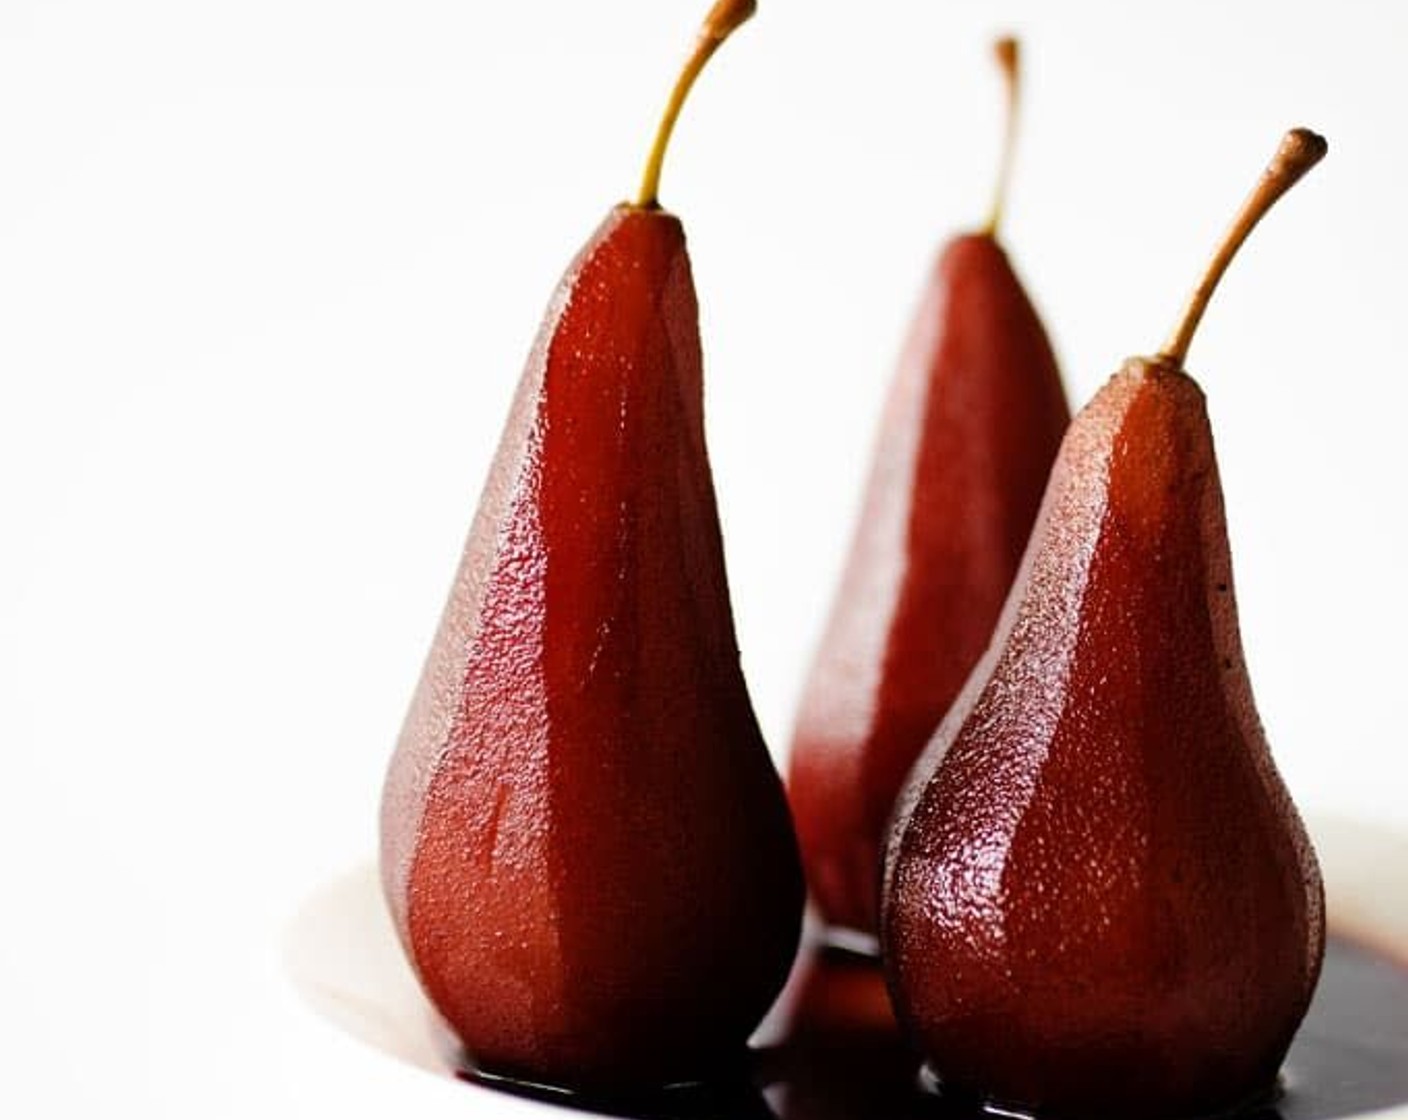 Dutch Poached Pears